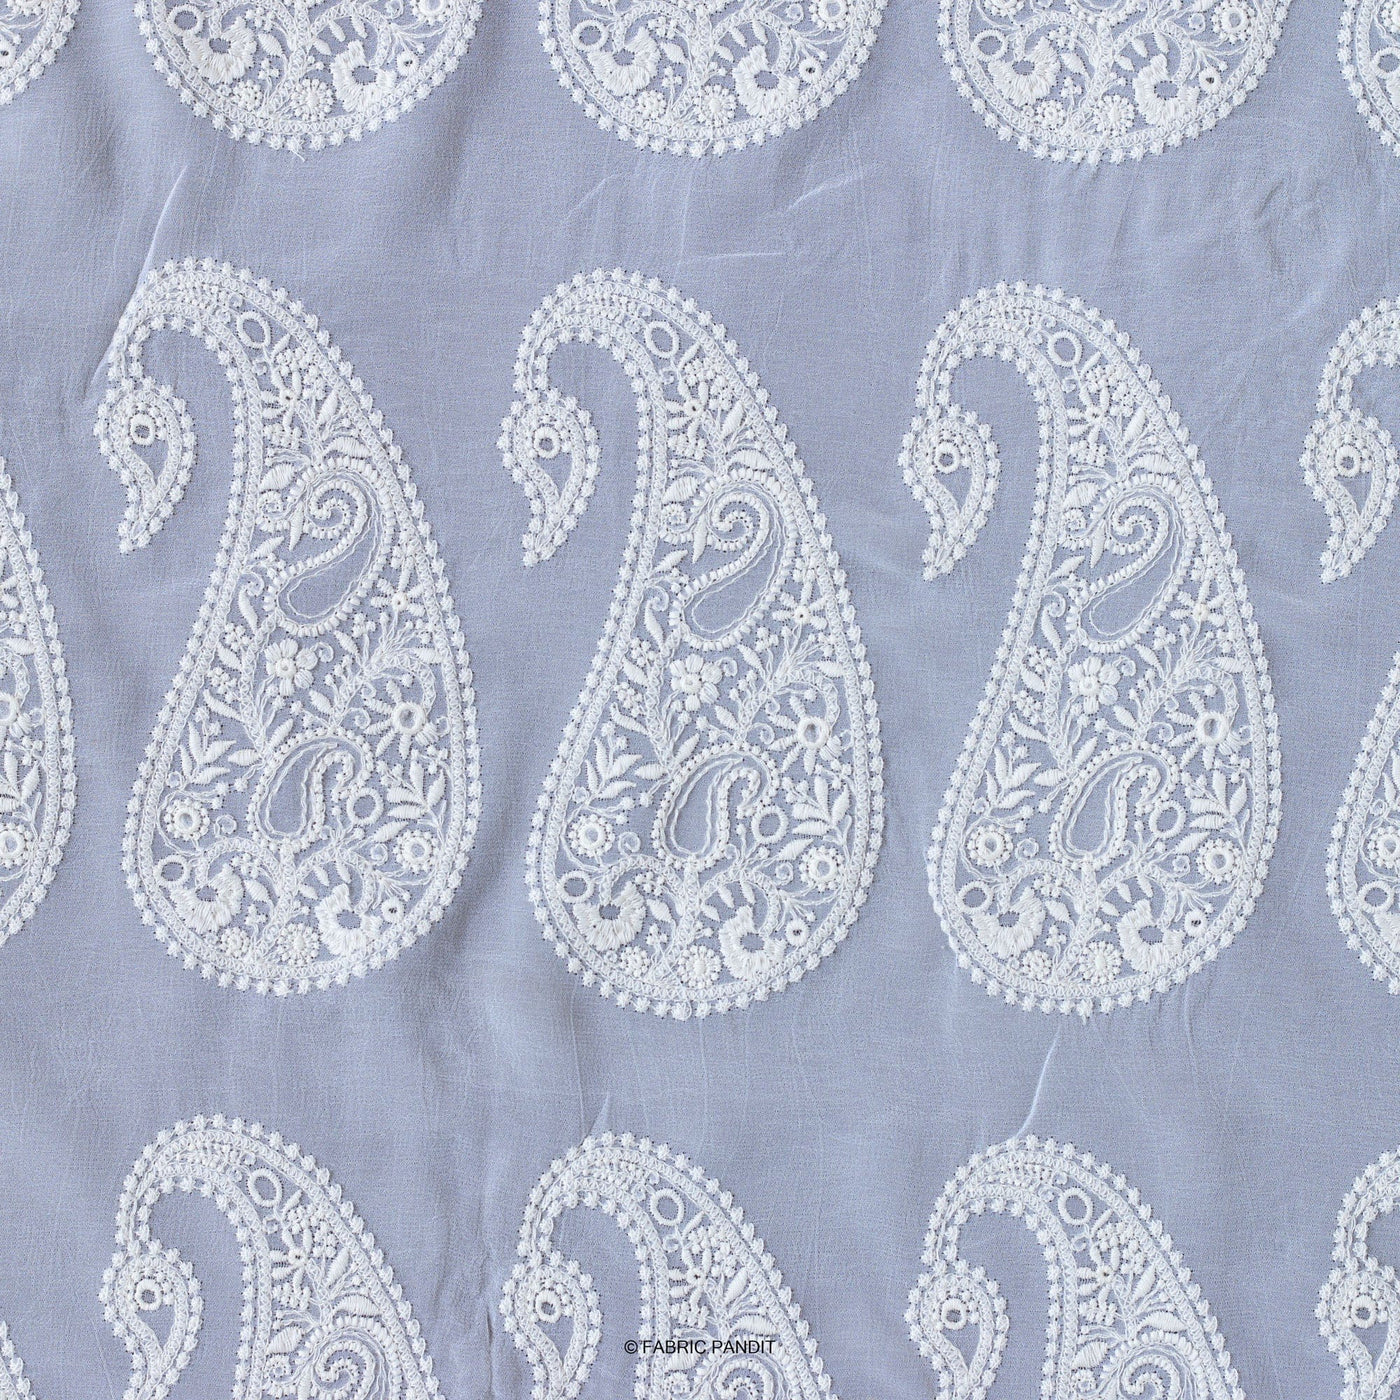 Fabric Pandit Fabric White Schifili Embroidered Shahi Paisely Pattern Pure Georgette Fabric (Width 44 inches)